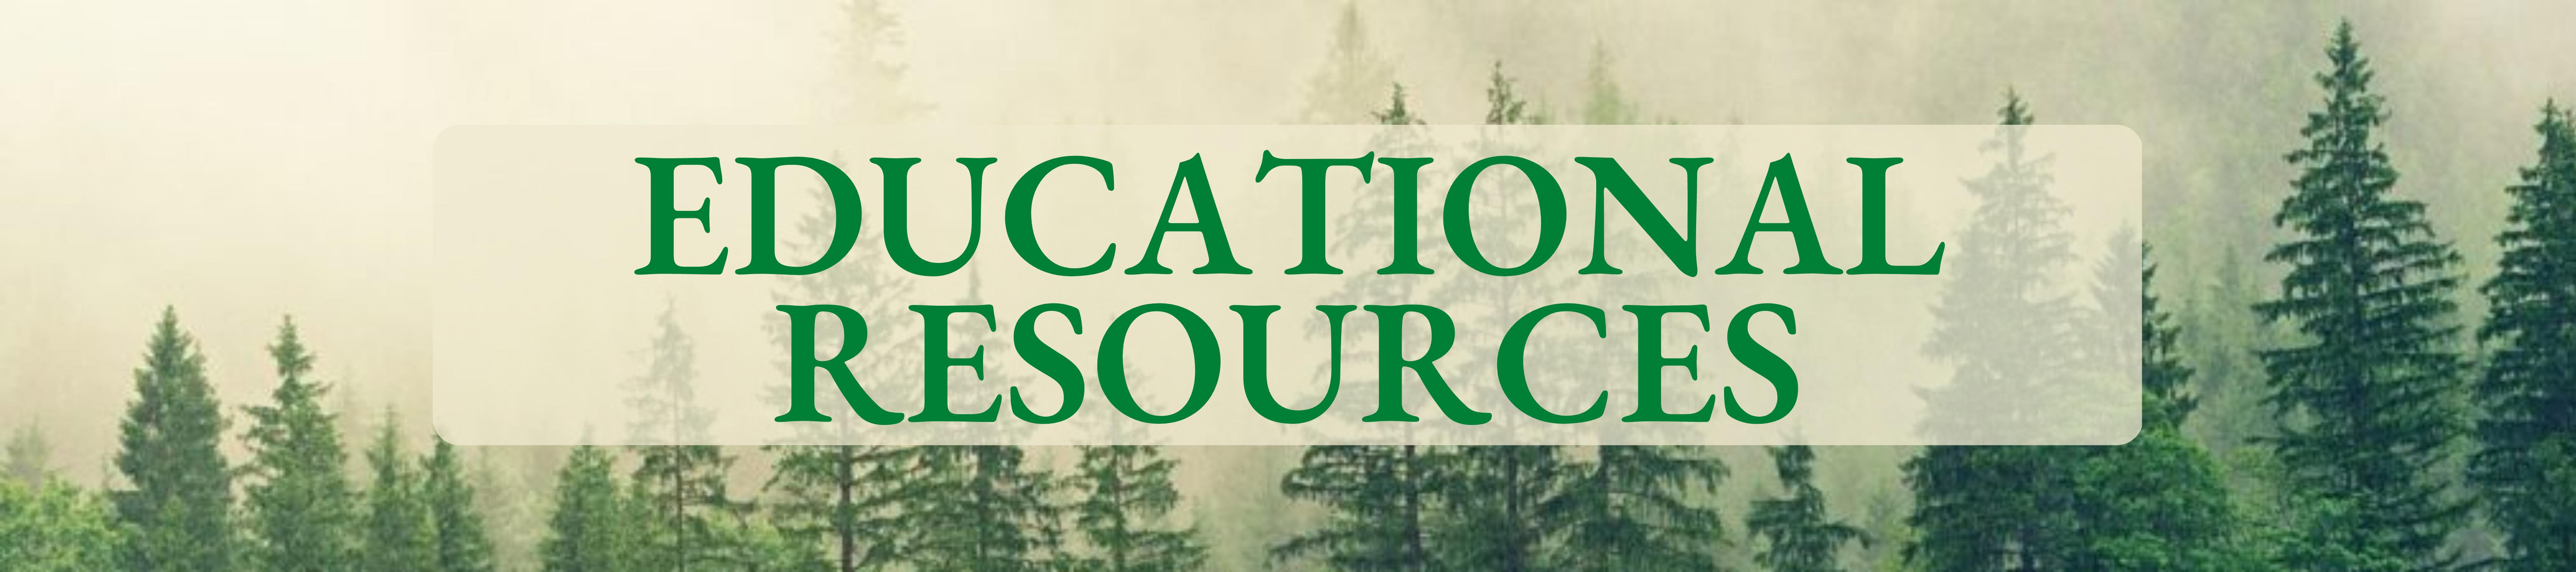 Ecologues Educational Resources banners 1